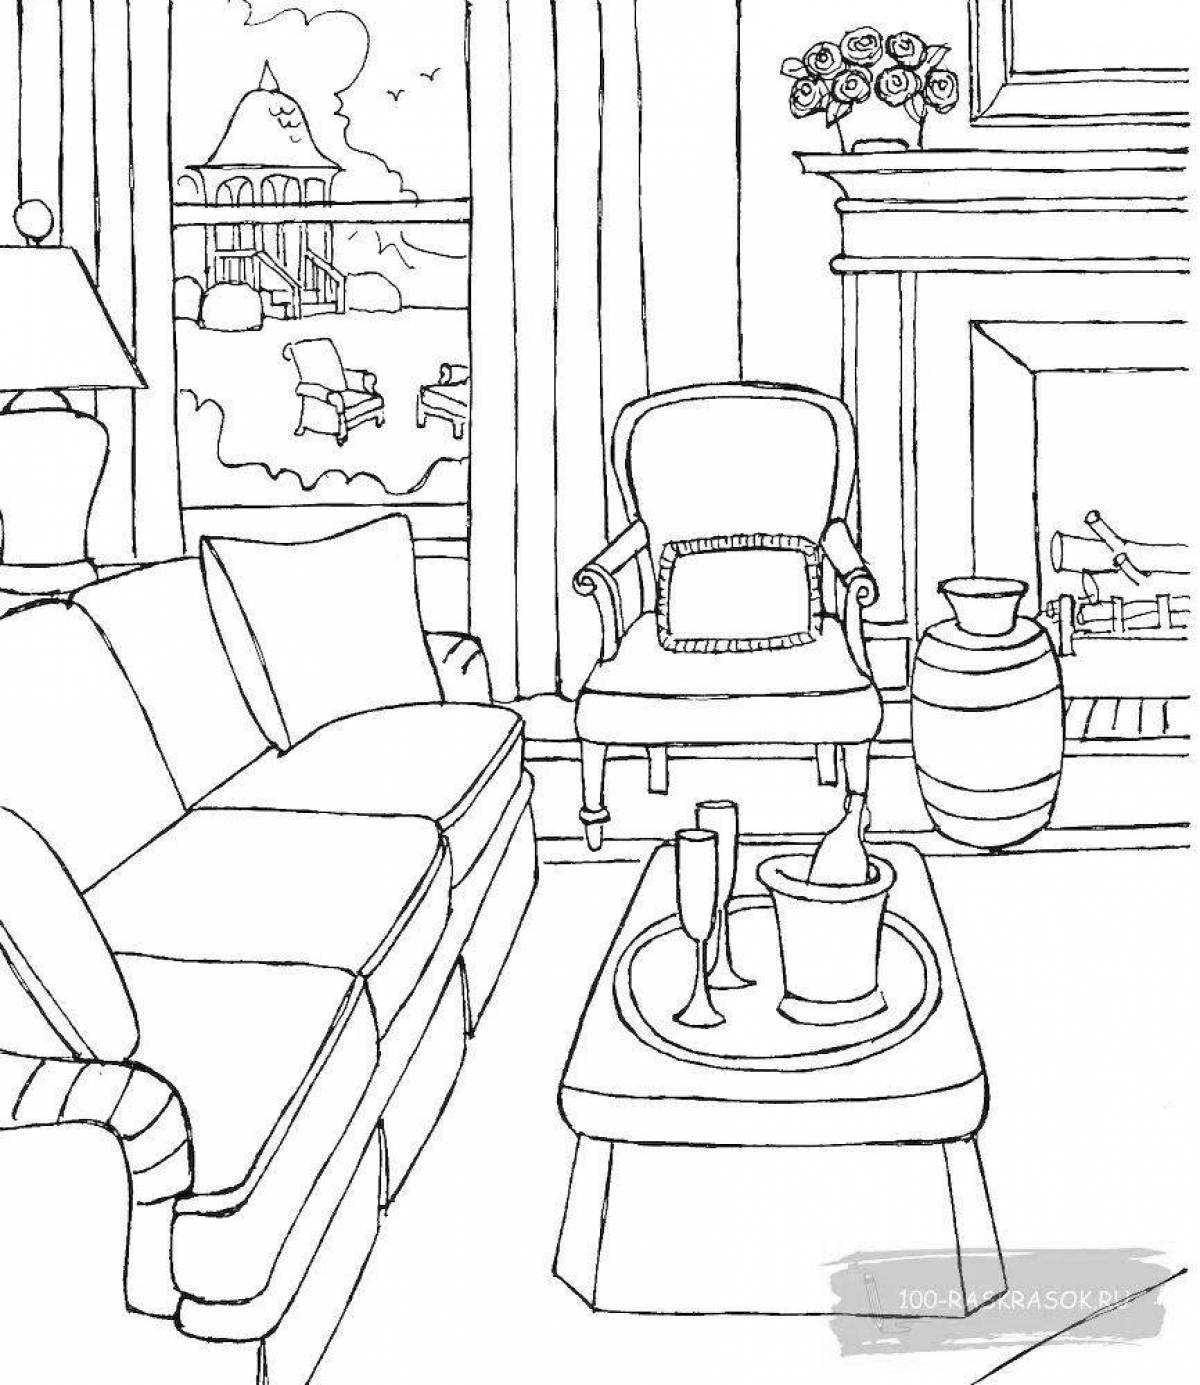 An interesting coloring book for the living room for children